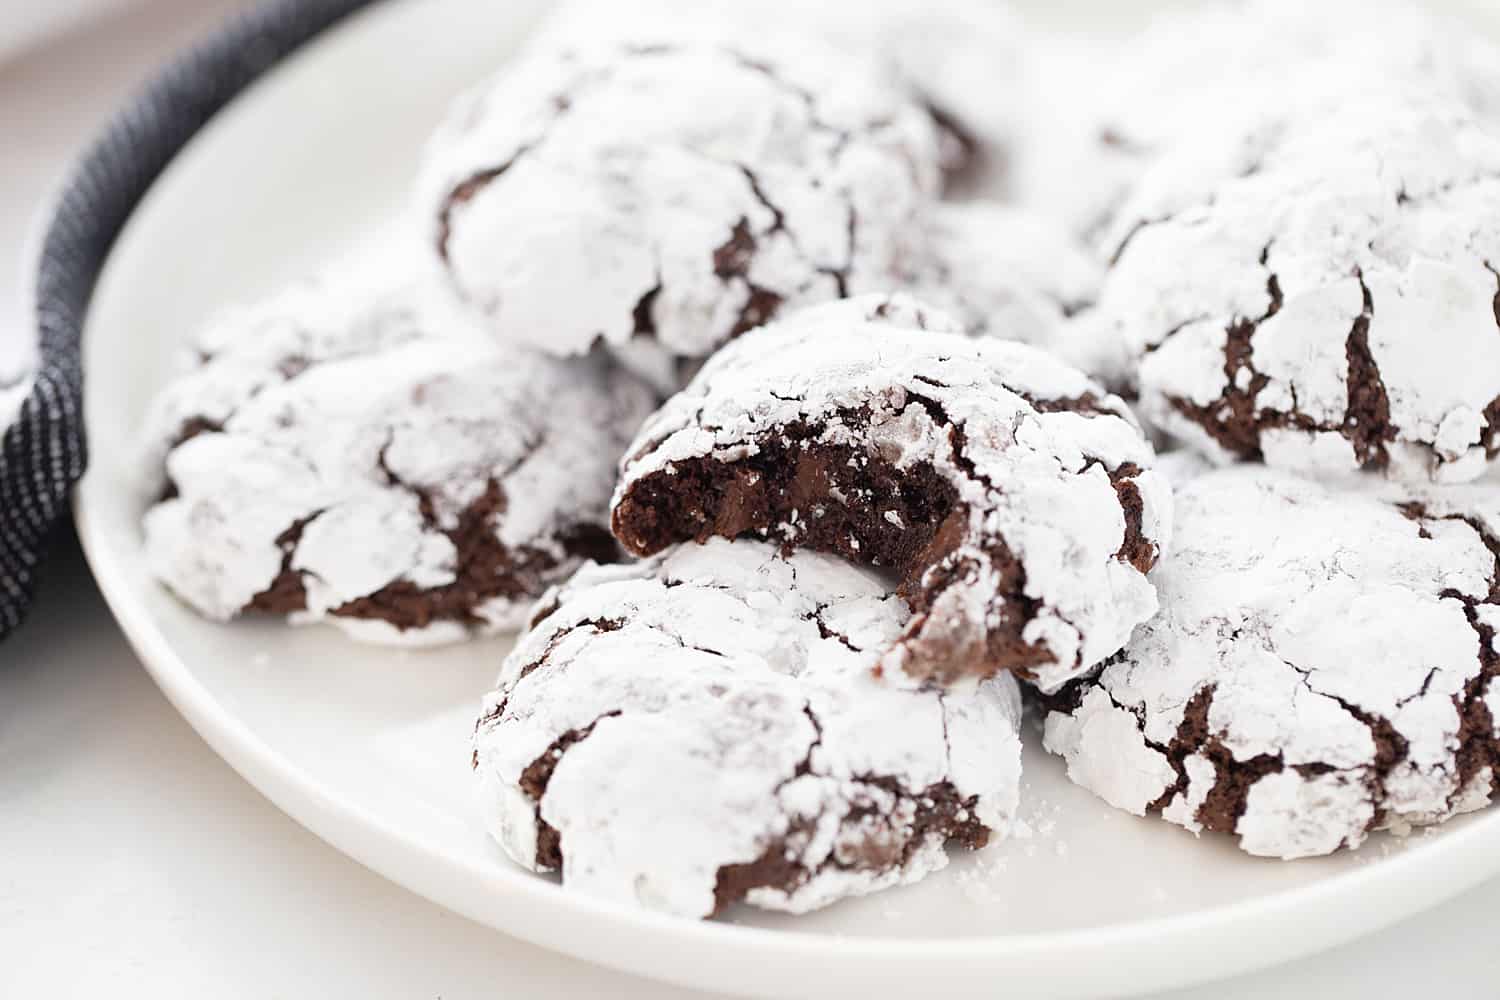 Double Chocolate Crinkle Cookies - Instant espresso powder + mini semisweet chocolate chips = next-level double chocolate crinkle cookies. One bite and you'll be hooked! #halfscratched #chocolate #cookies #crinklecookies #baking #cookierecipe #holidayrecipe #easyrecipe 